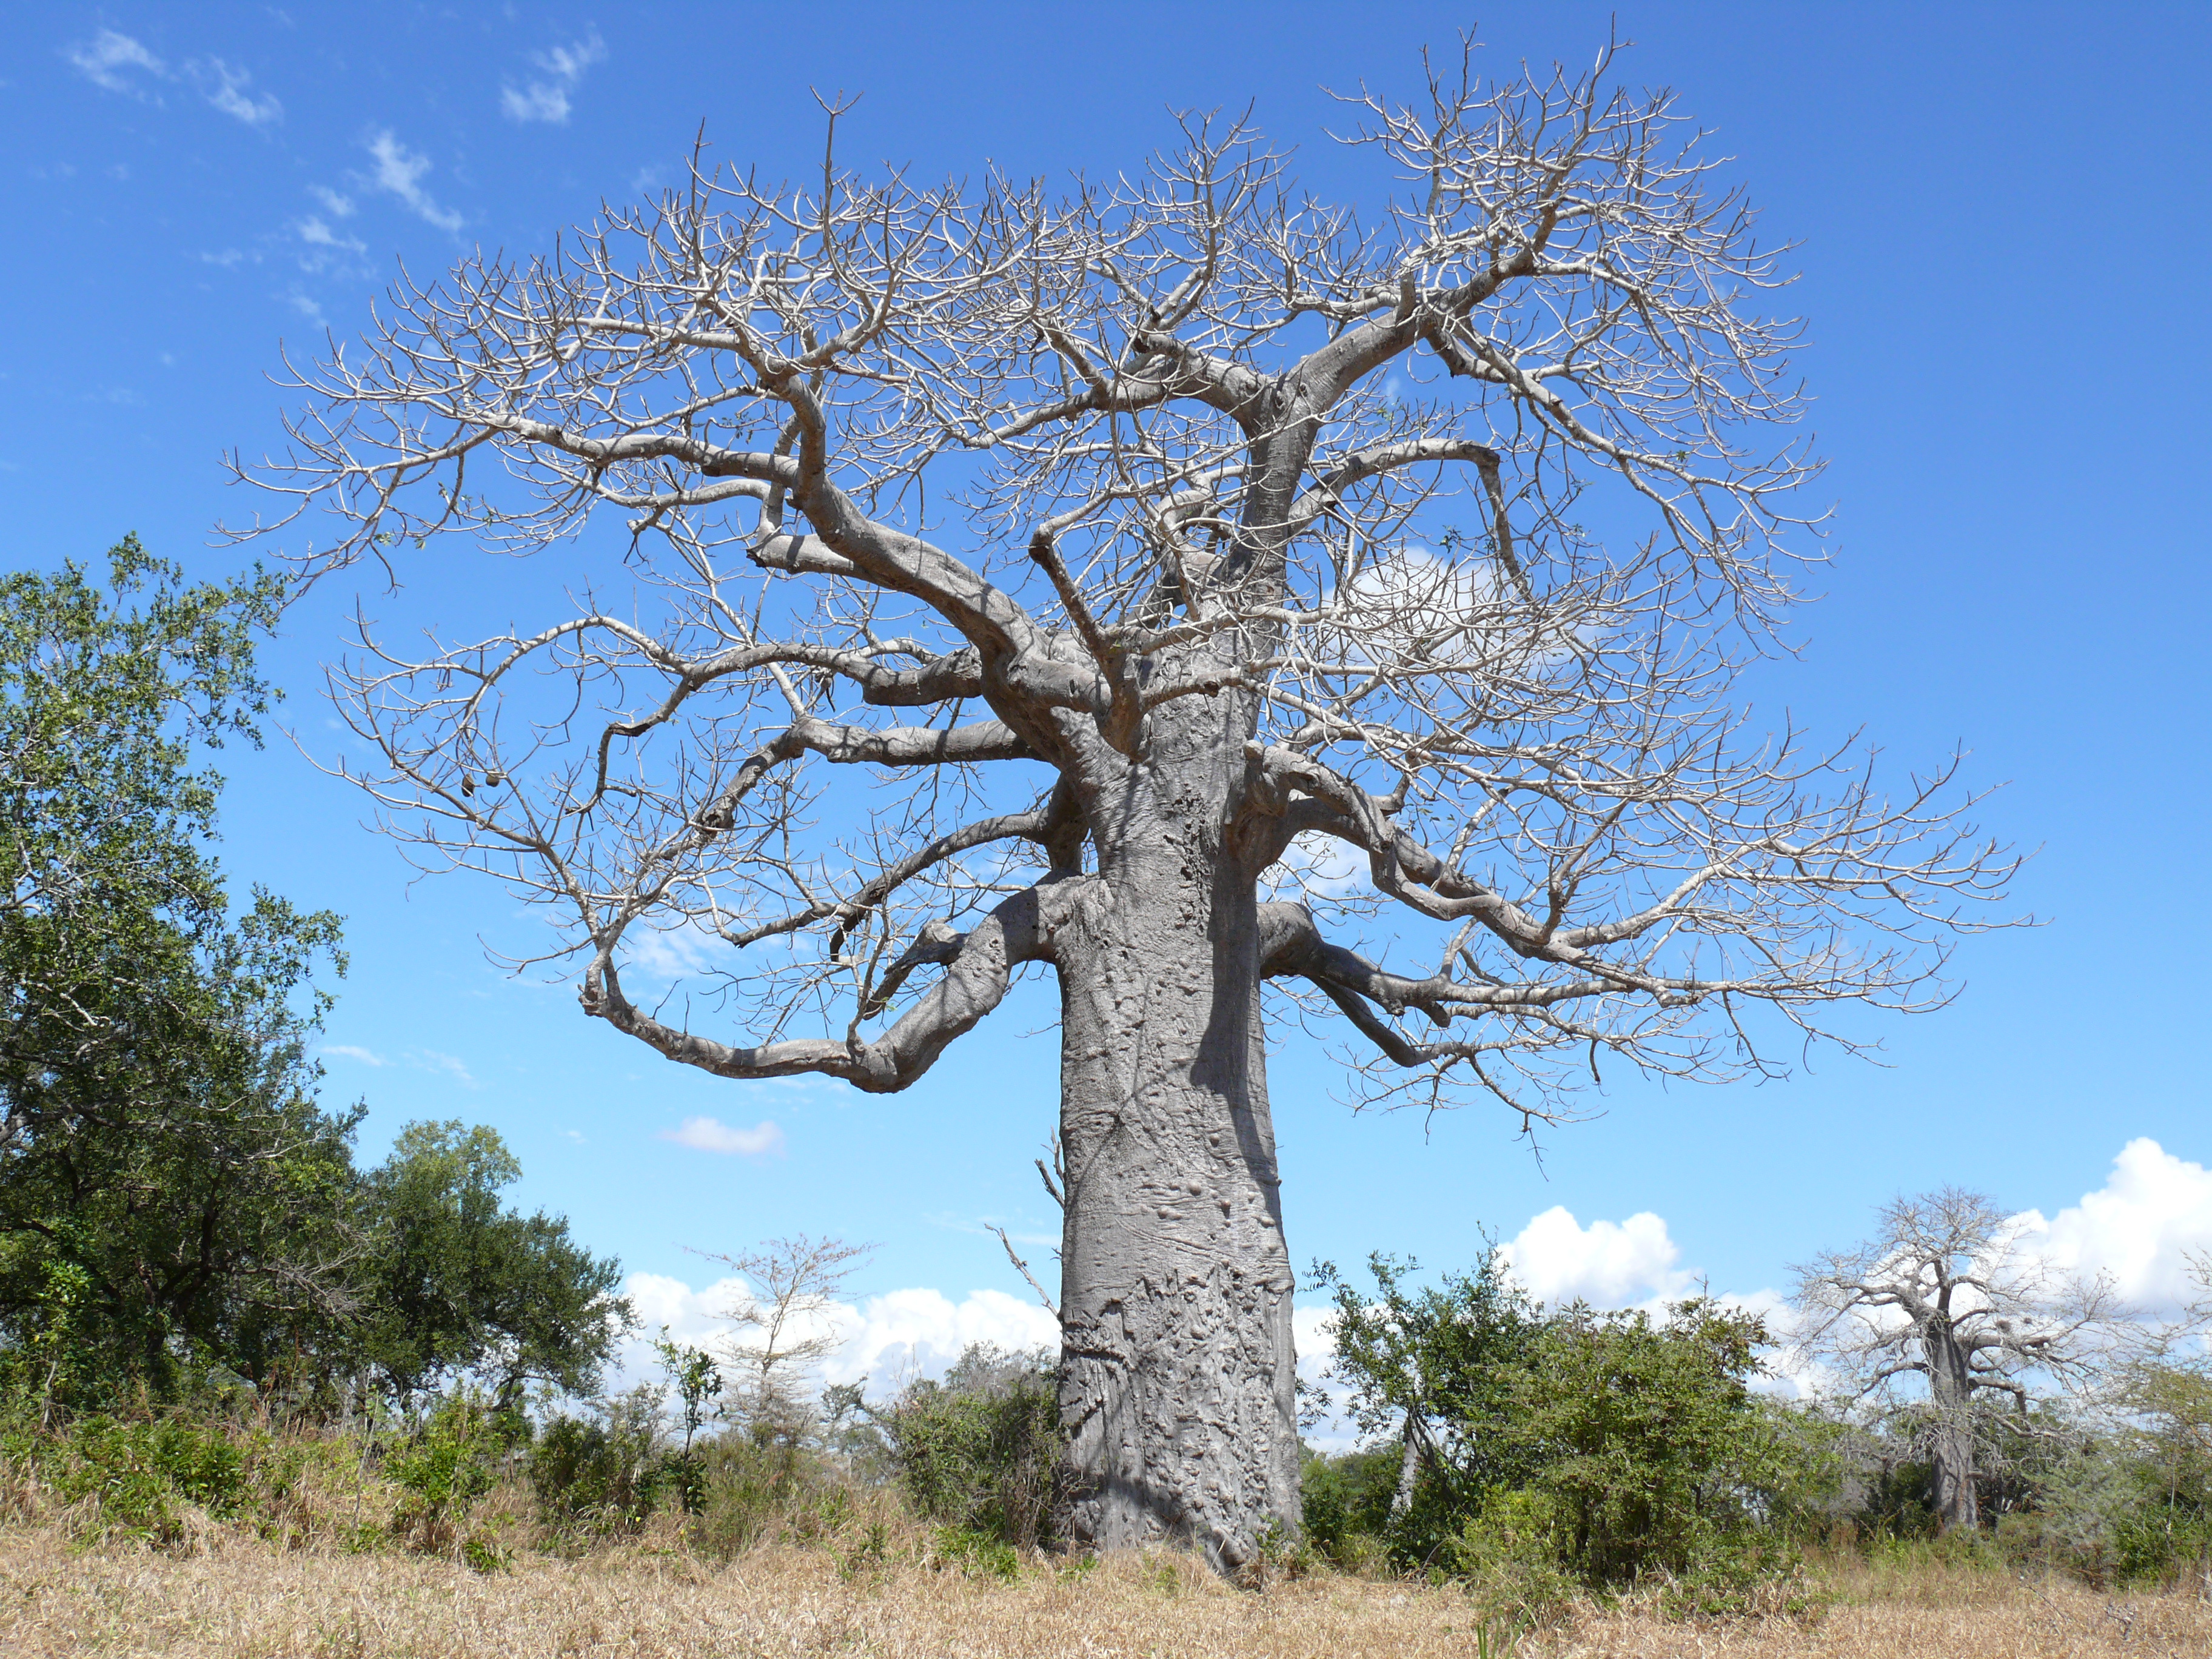 Baobab tree, Abstract, Blue, Branches, Sky, HQ Photo